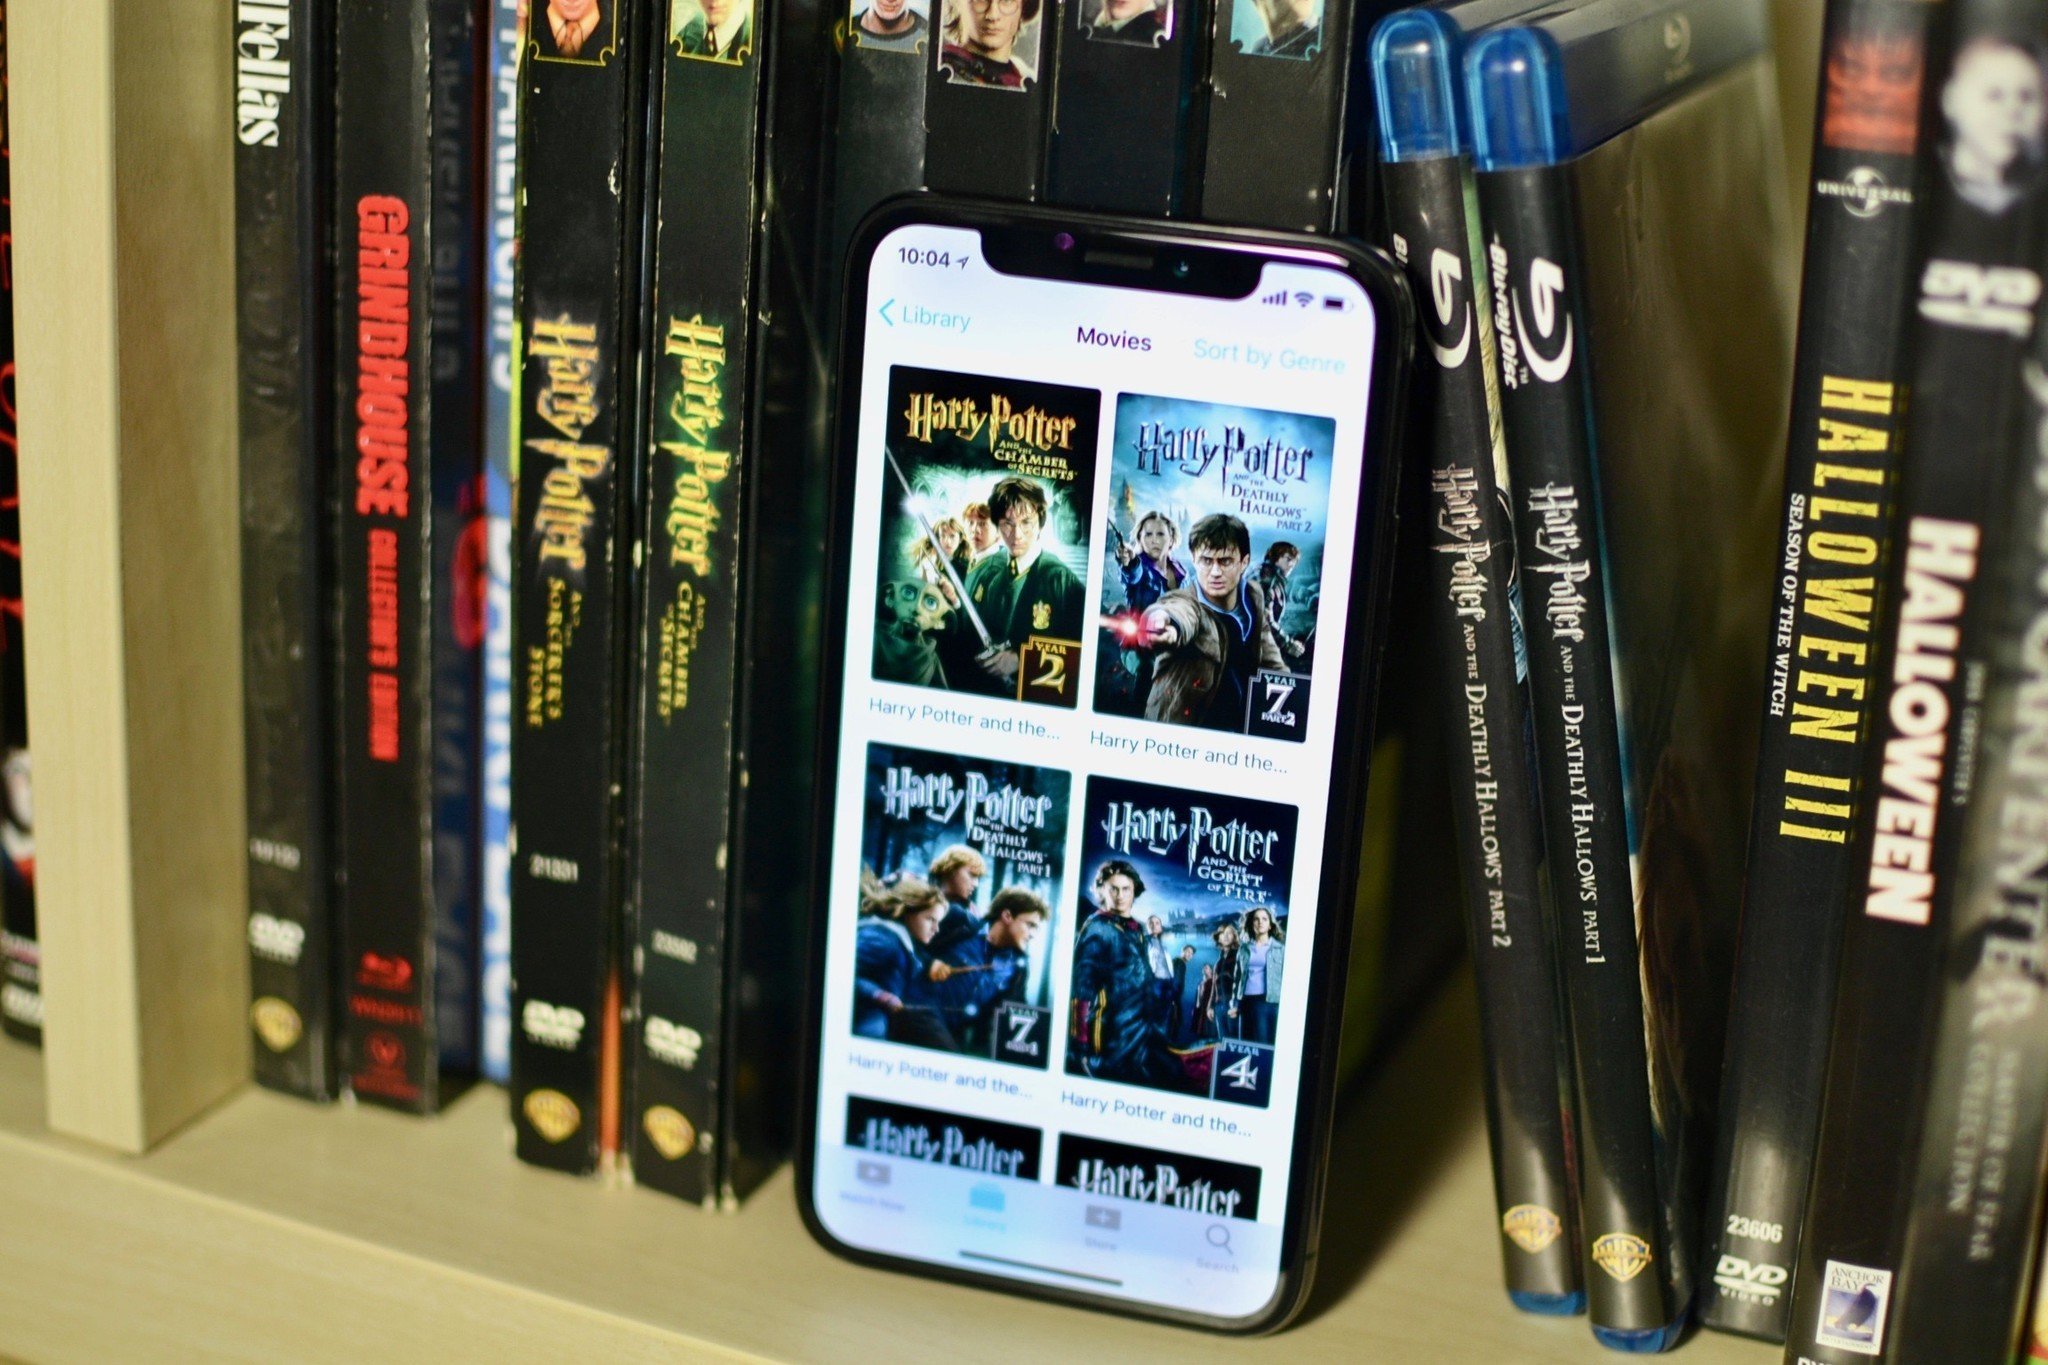 How to download a movie on vudu app